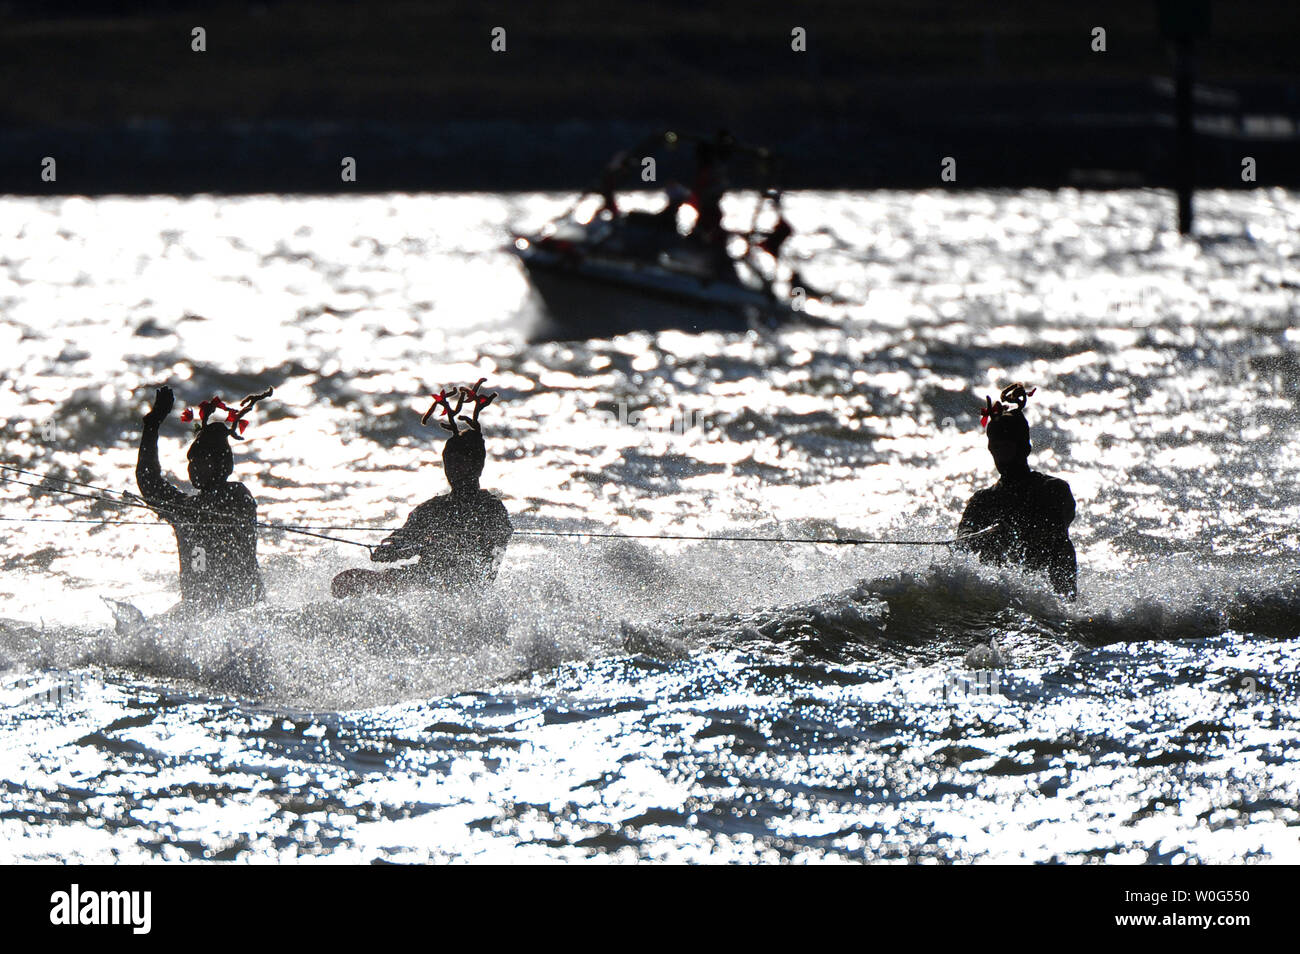 Kneeborders dressed as an reindeer perform during the 25th annual Water-Skiing Santa show on the Potomac River at the National Harbor in Maryland on December 24, 2010.   UPI/Kevin Dietsch Stock Photo